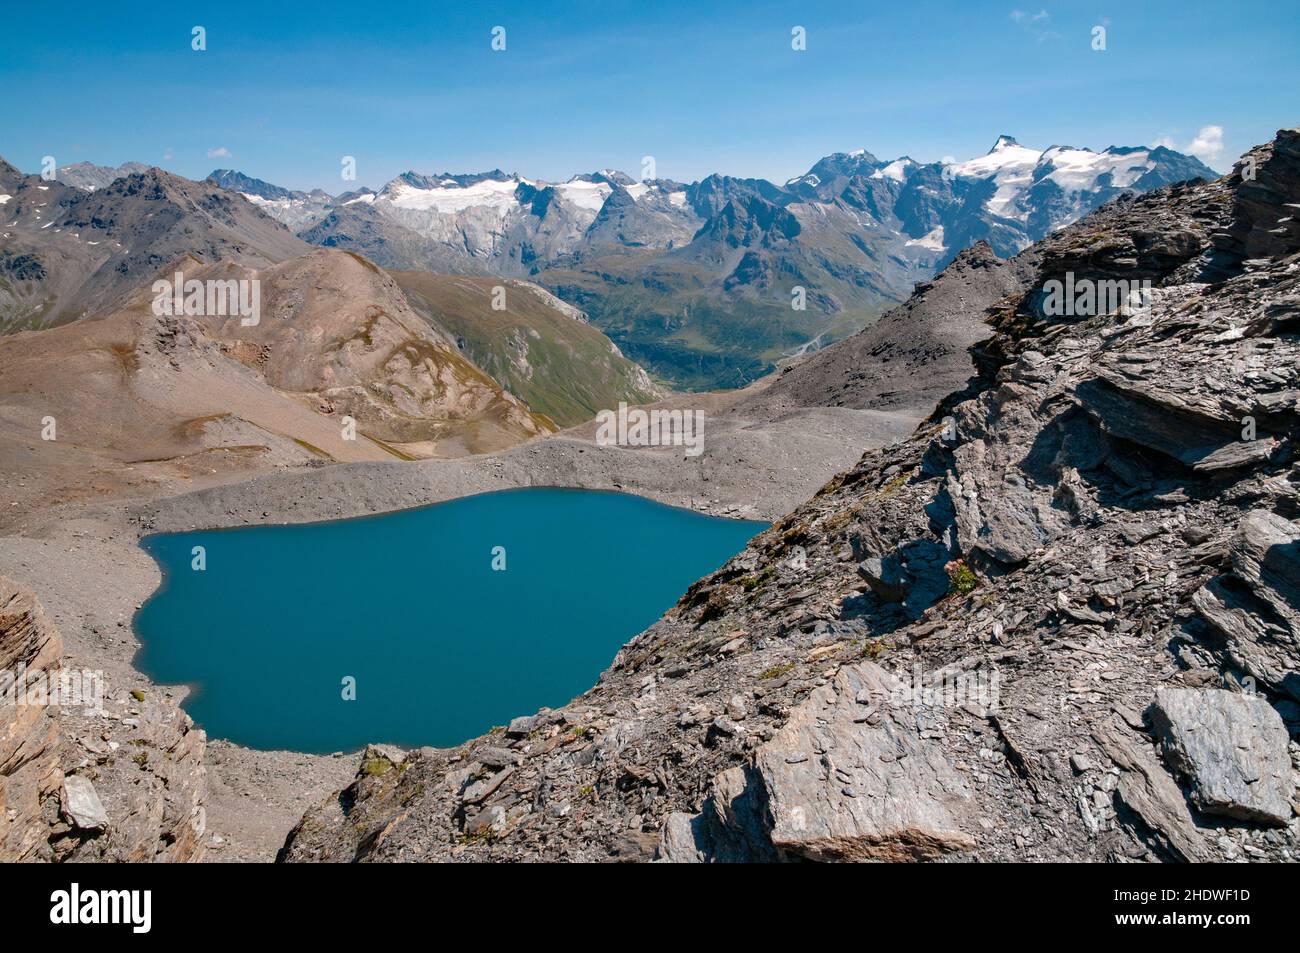 Lake of Grand Fond and the Albaron summit (3637m) in the background from Pointe des Fours (3072m), Haute-Maurienne, Vanoise massif, Bonneval-sur-Arc, Stock Photo